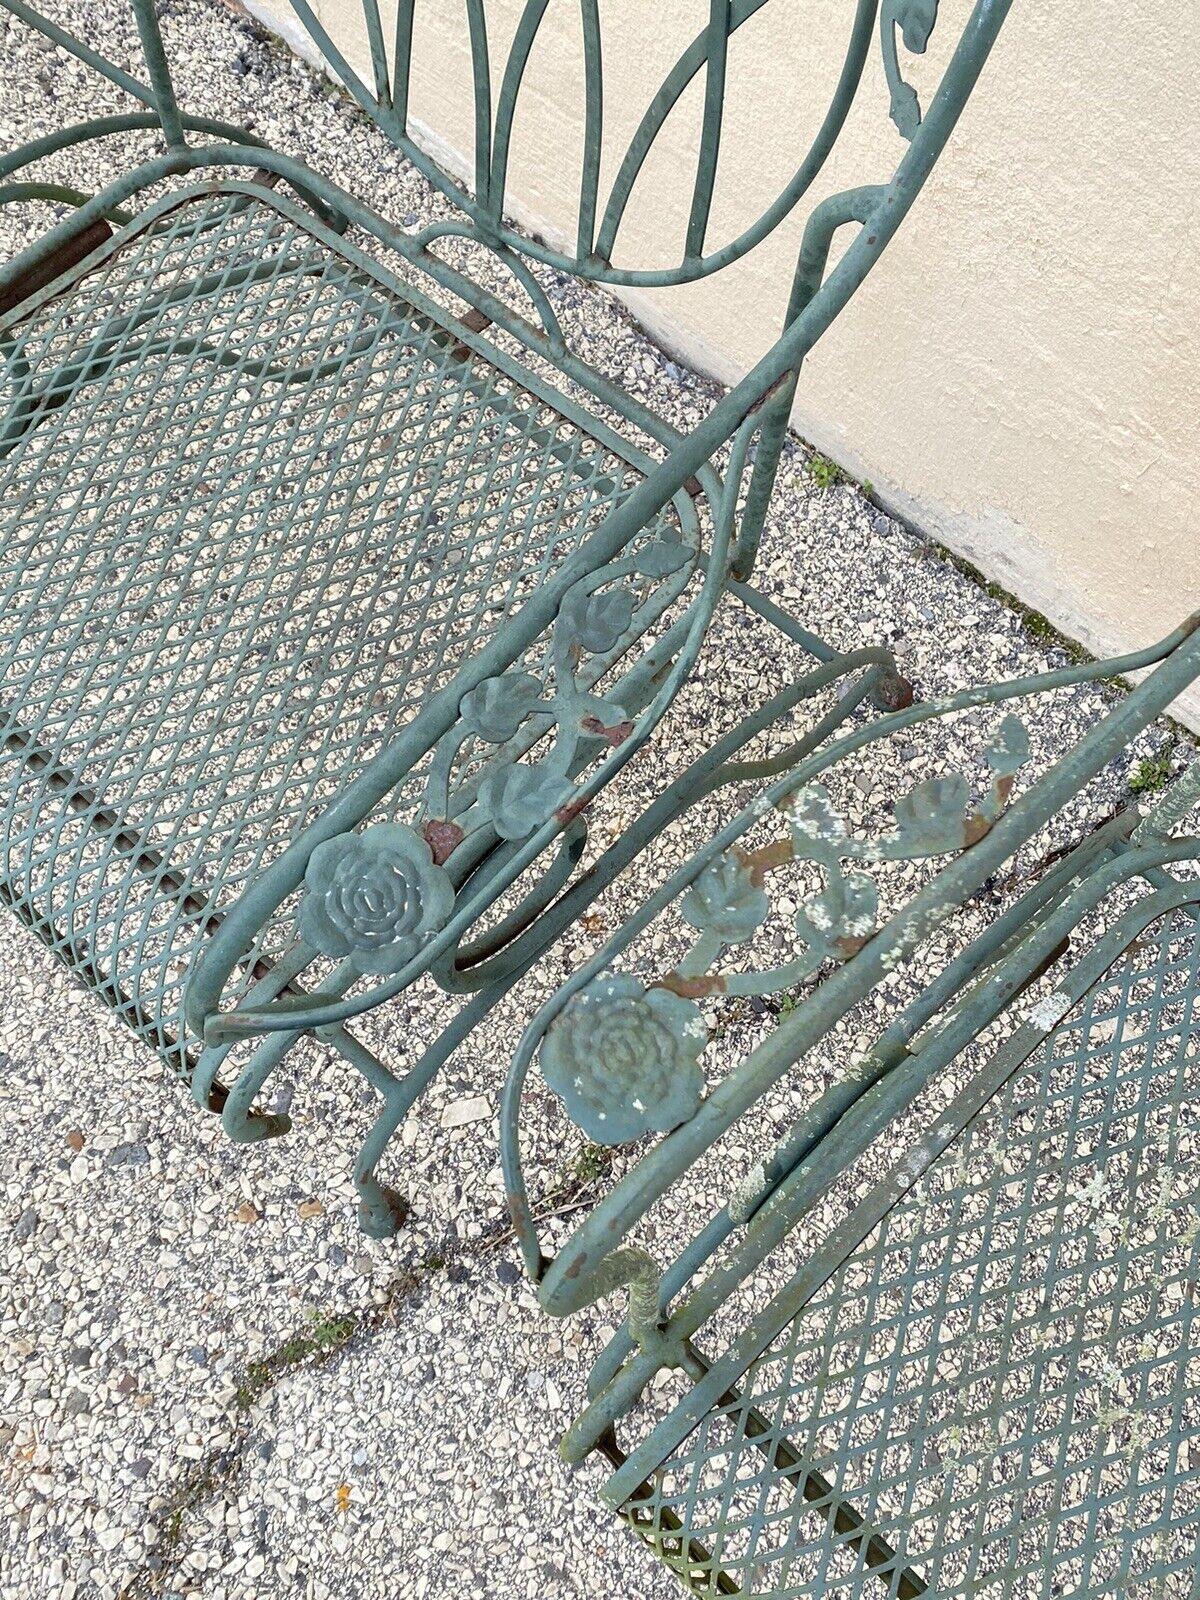 Wrought Iron Green Woodard Rose Style Garden Patio Springer Chairs - Set of 4